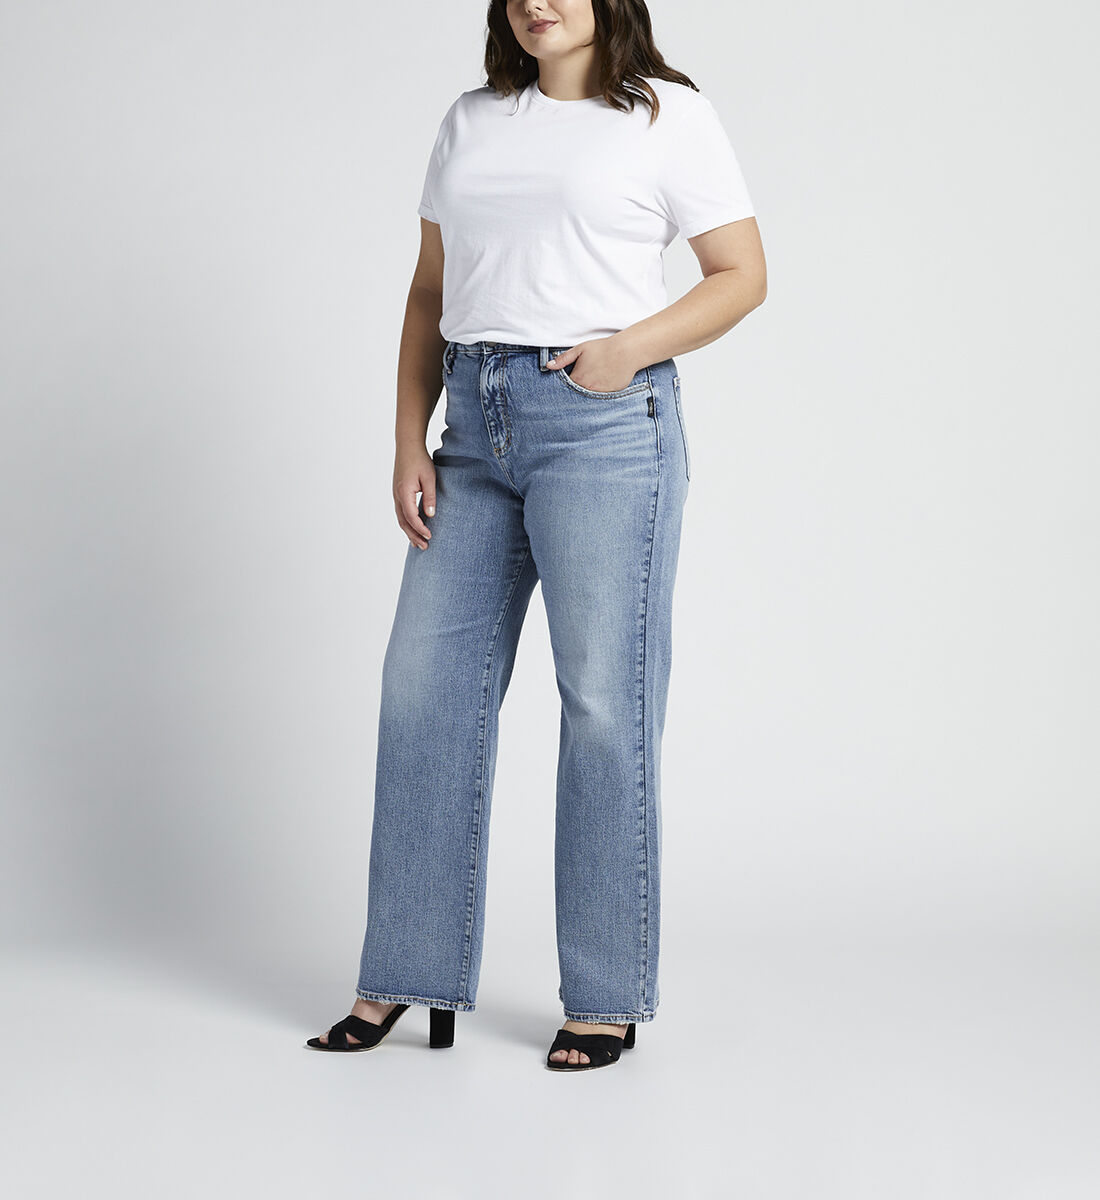 Highly Desirable High Rise Trouser Leg Jeans Plus Size Side